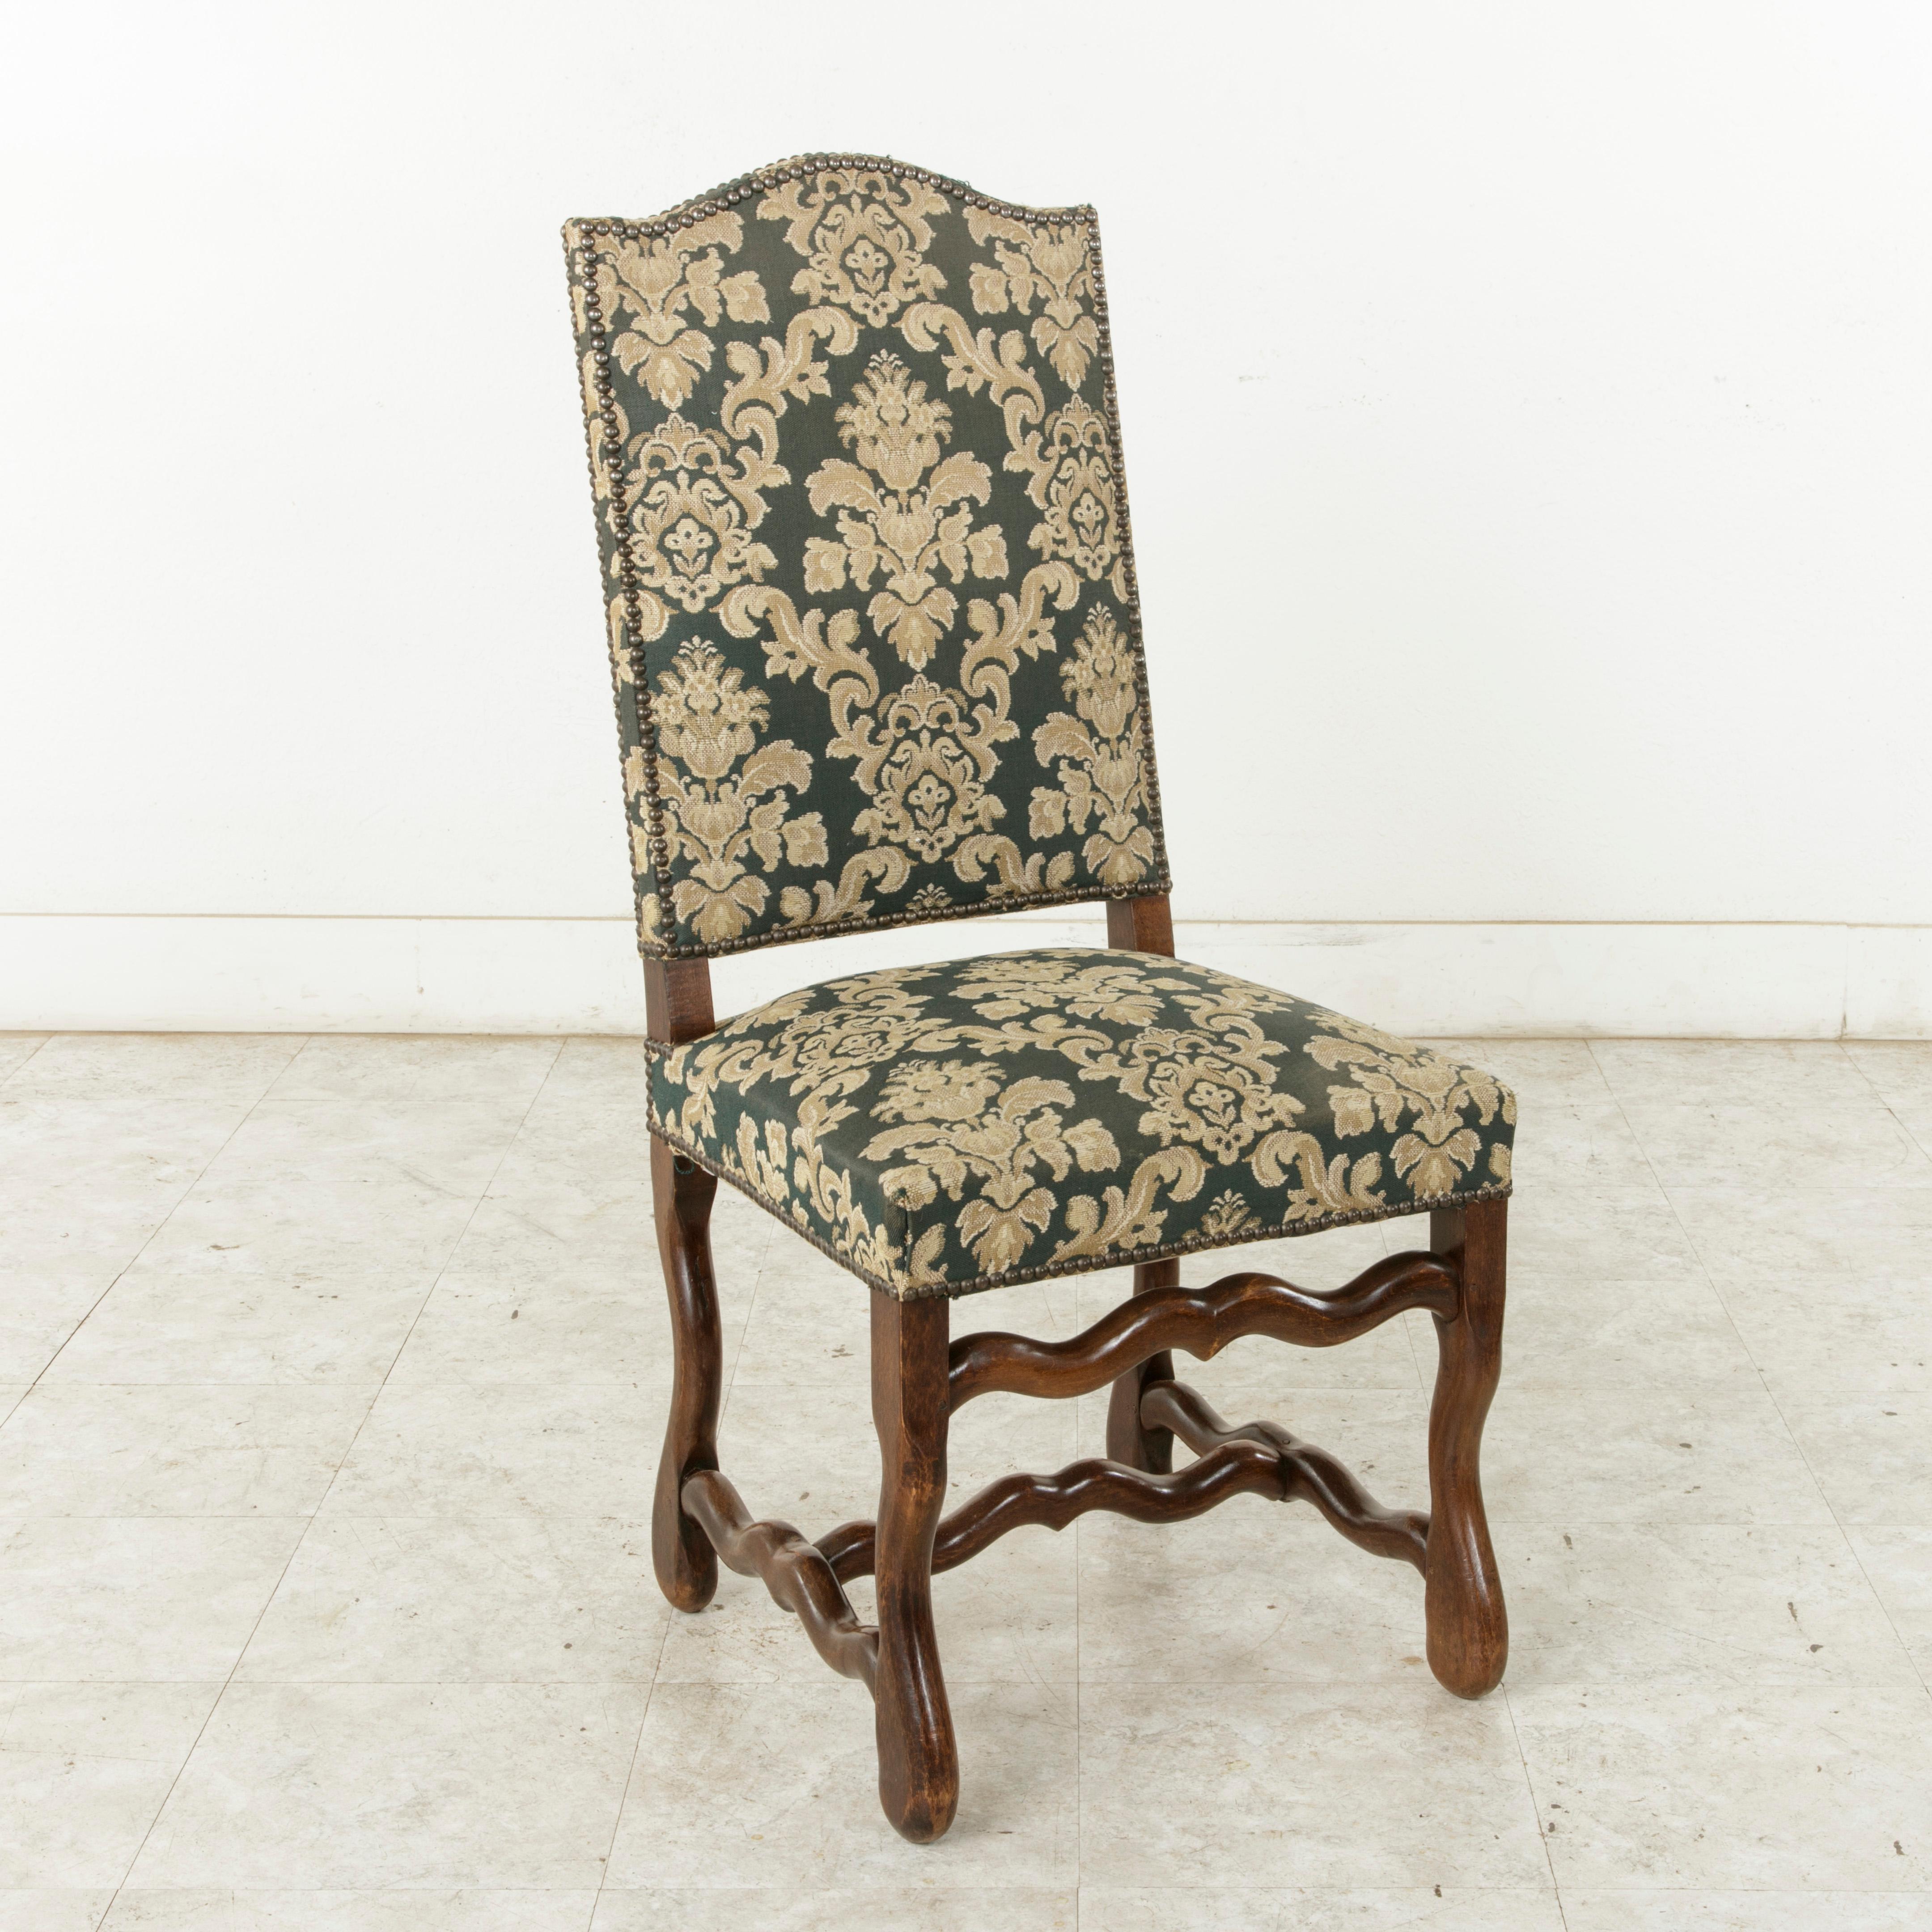 This set of eight French ash mutton leg side chairs or dining chairs from the mid-20th century are of hand pegged construction. These tall dining chairs with arched backs are upholstered in a green tapestry and finished with nailhead trim. The